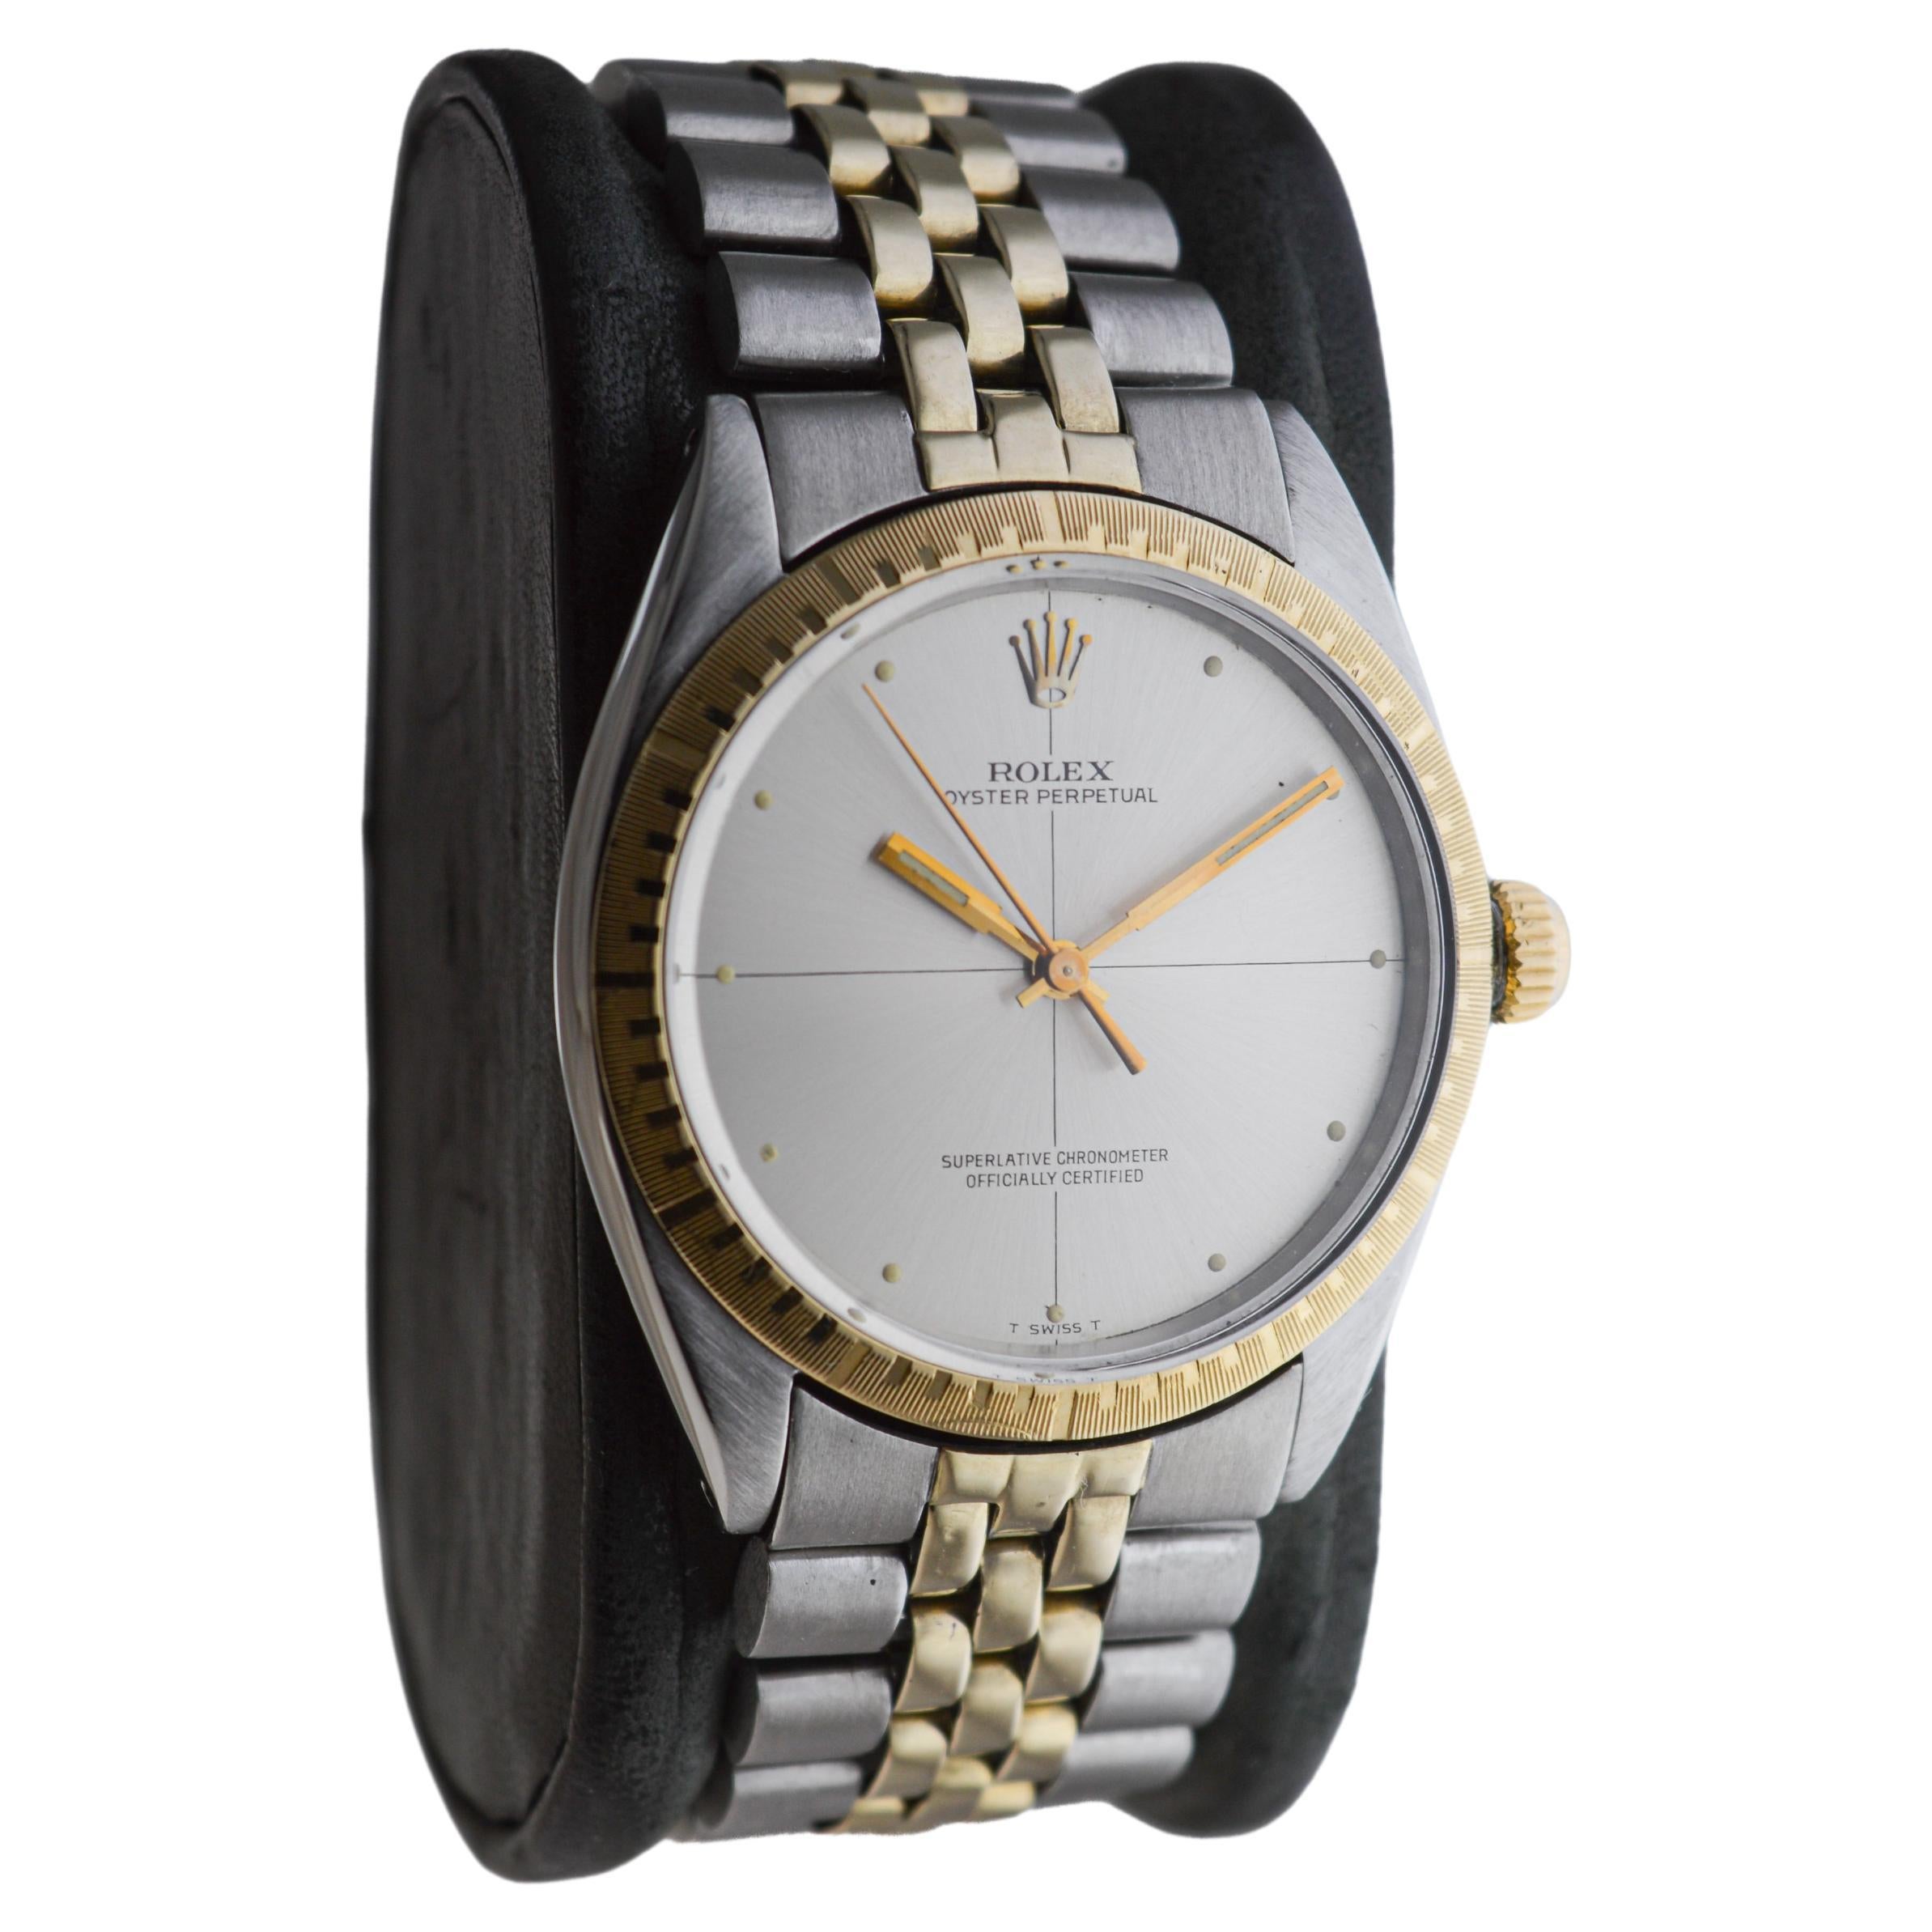 FACTORY / HOUSE: Rolex Watch Company
STYLE / REFERENCE: Zephyr / Reference 1038/1008
METAL / MATERIAL:  Two Tone 14Kt. & Steel 
CIRCA / YEAR: 1968
DIMENSIONS / SIZE: Length 40mm X Diameter 34mm
MOVEMENT / CALIBER: Perpetual Winding / 26 Jewels /